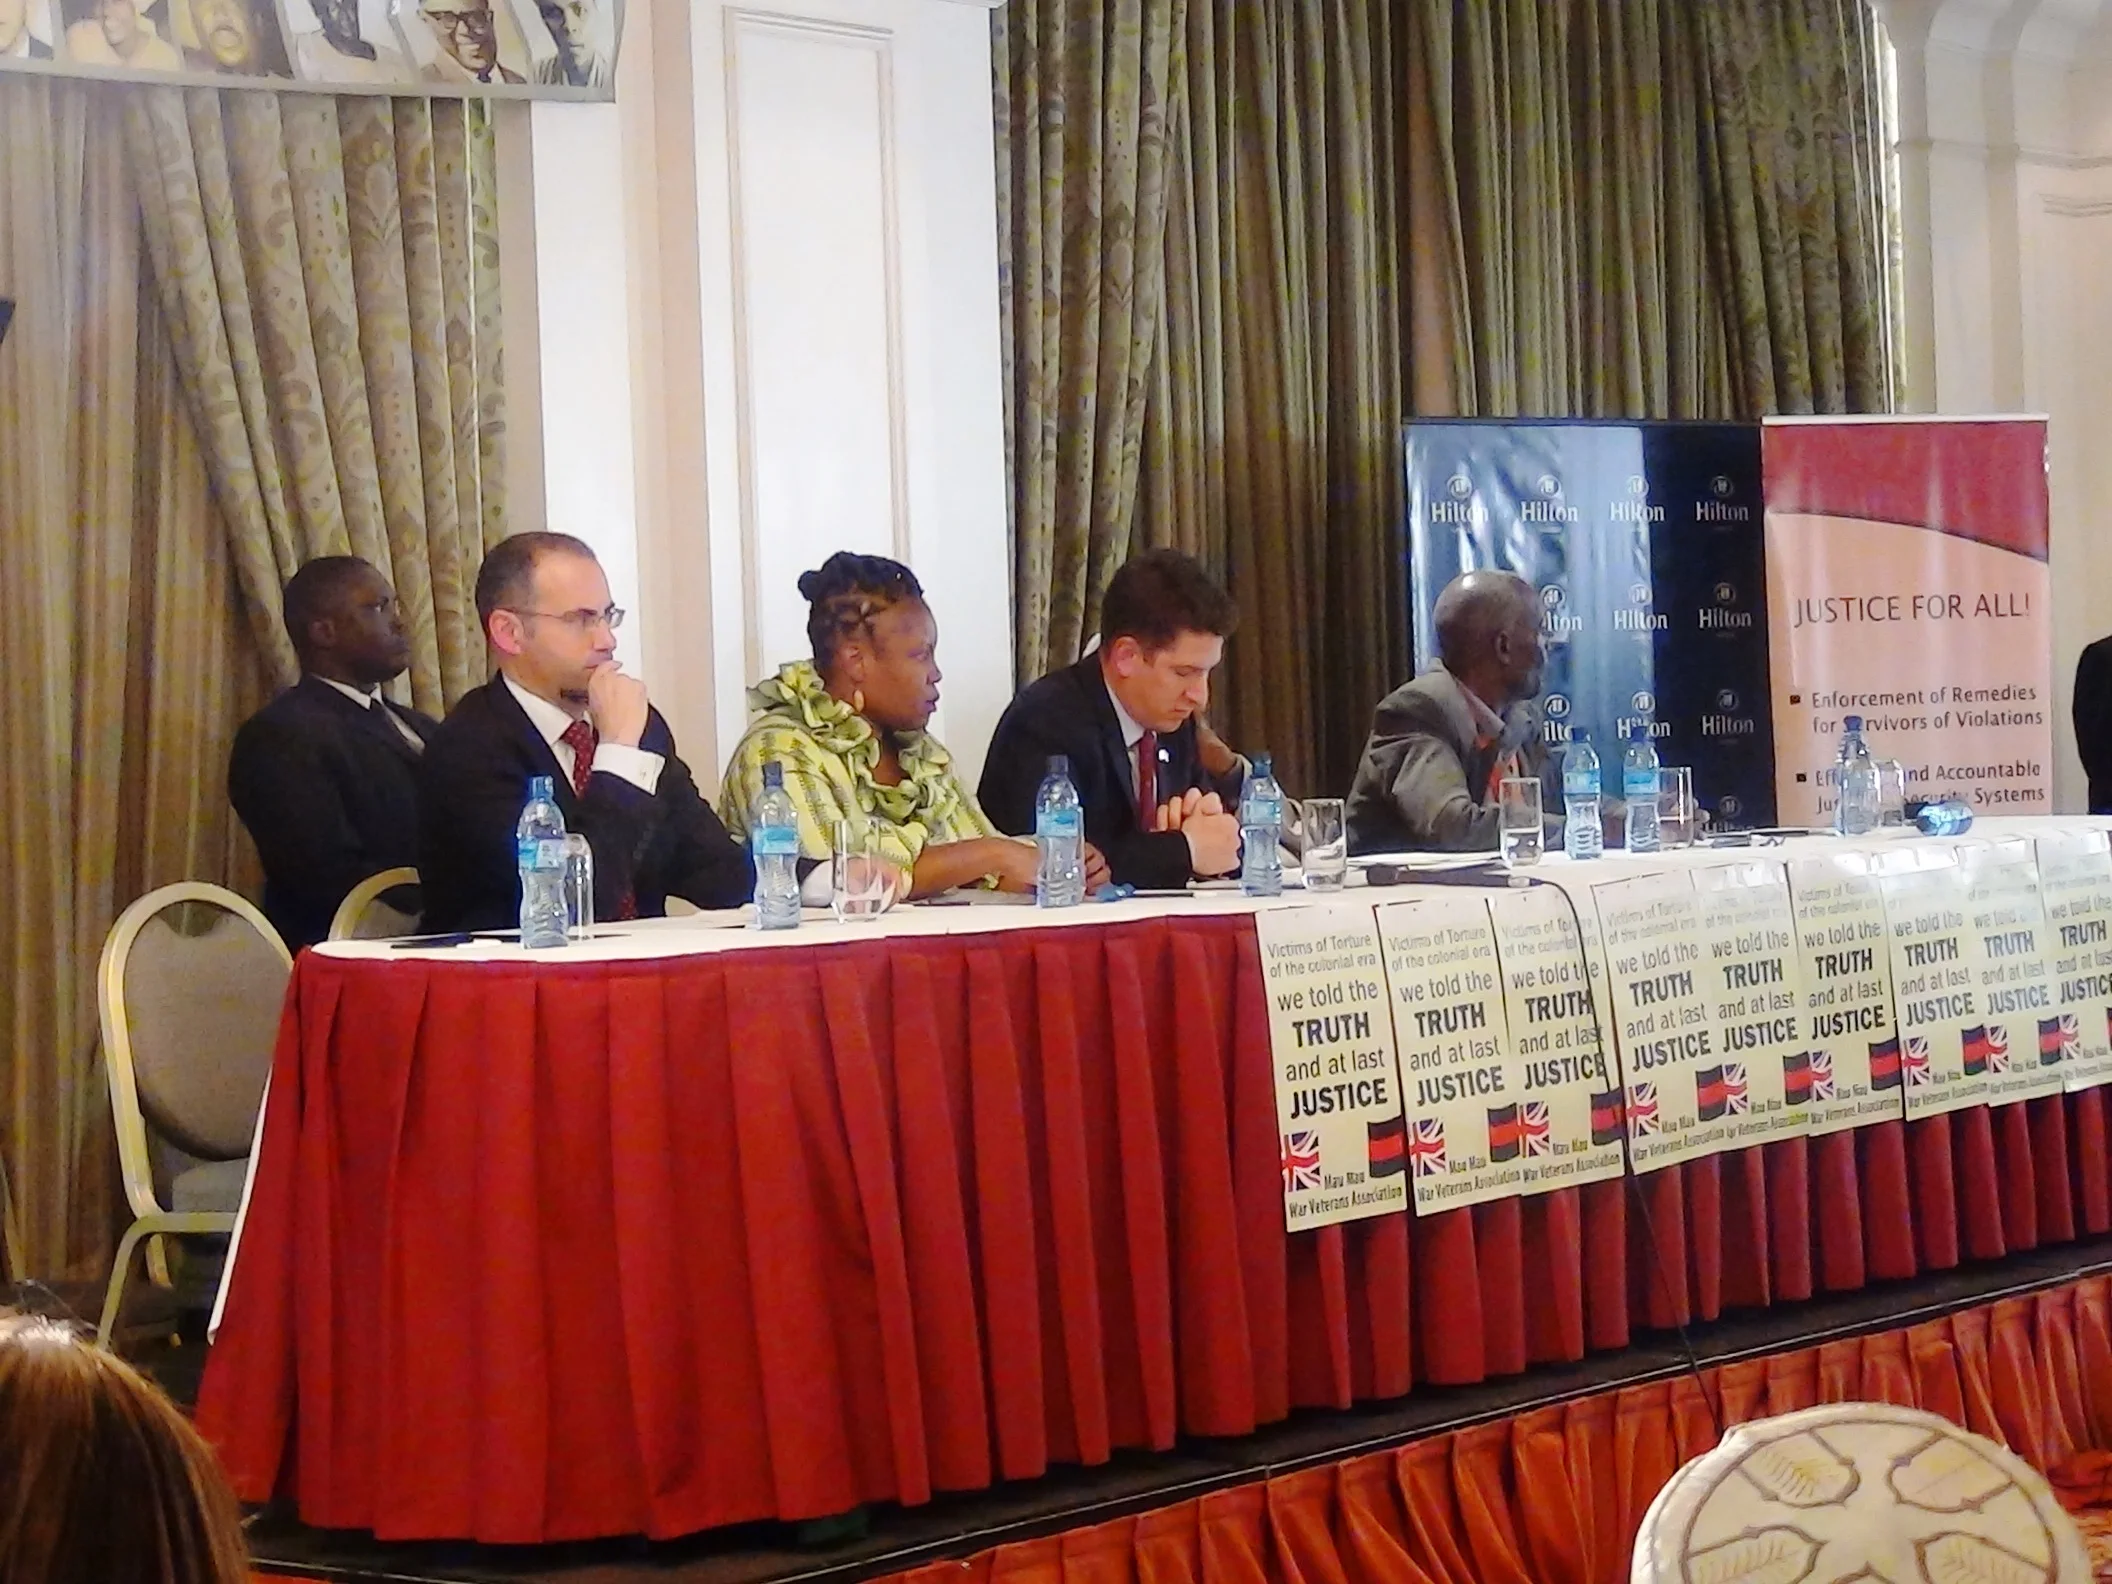 From left to right ( front raw) Dan Leader (partner at Leigh Day&Co) Atsango Chesoni (Executive Director KHRC), Dr. Chris Turner ( British High Commissioner to Kenya), Kiburu M’marete( Vice-chair, MMWVA). Security ( back row